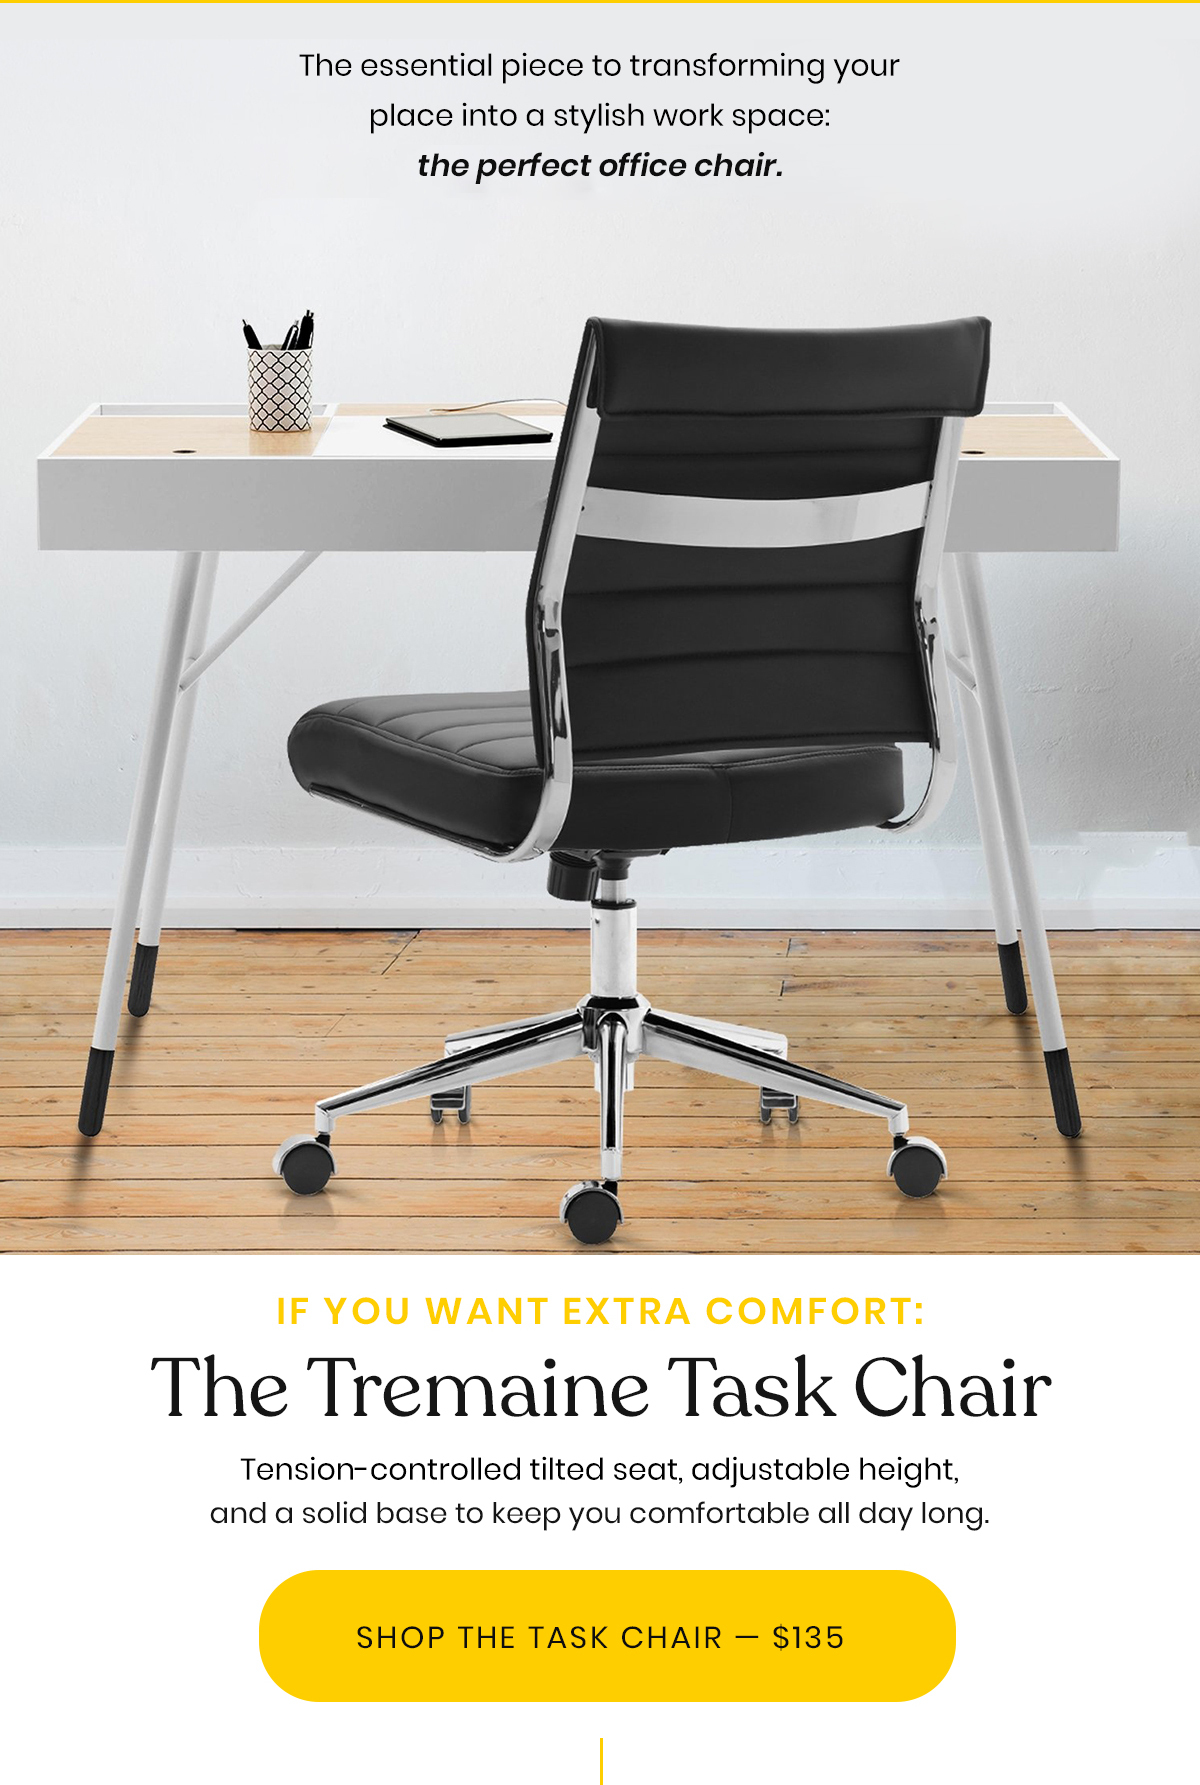 The essential piece to transforming your place into a stylish work space: the perfect office chair. | If Want Extra Comfort: The Tremaine Task Chair | Tension-controlled tilted seat, adjustable height, and a solid base to keep you comfortable all day long. | Shop The Task Chair - $135